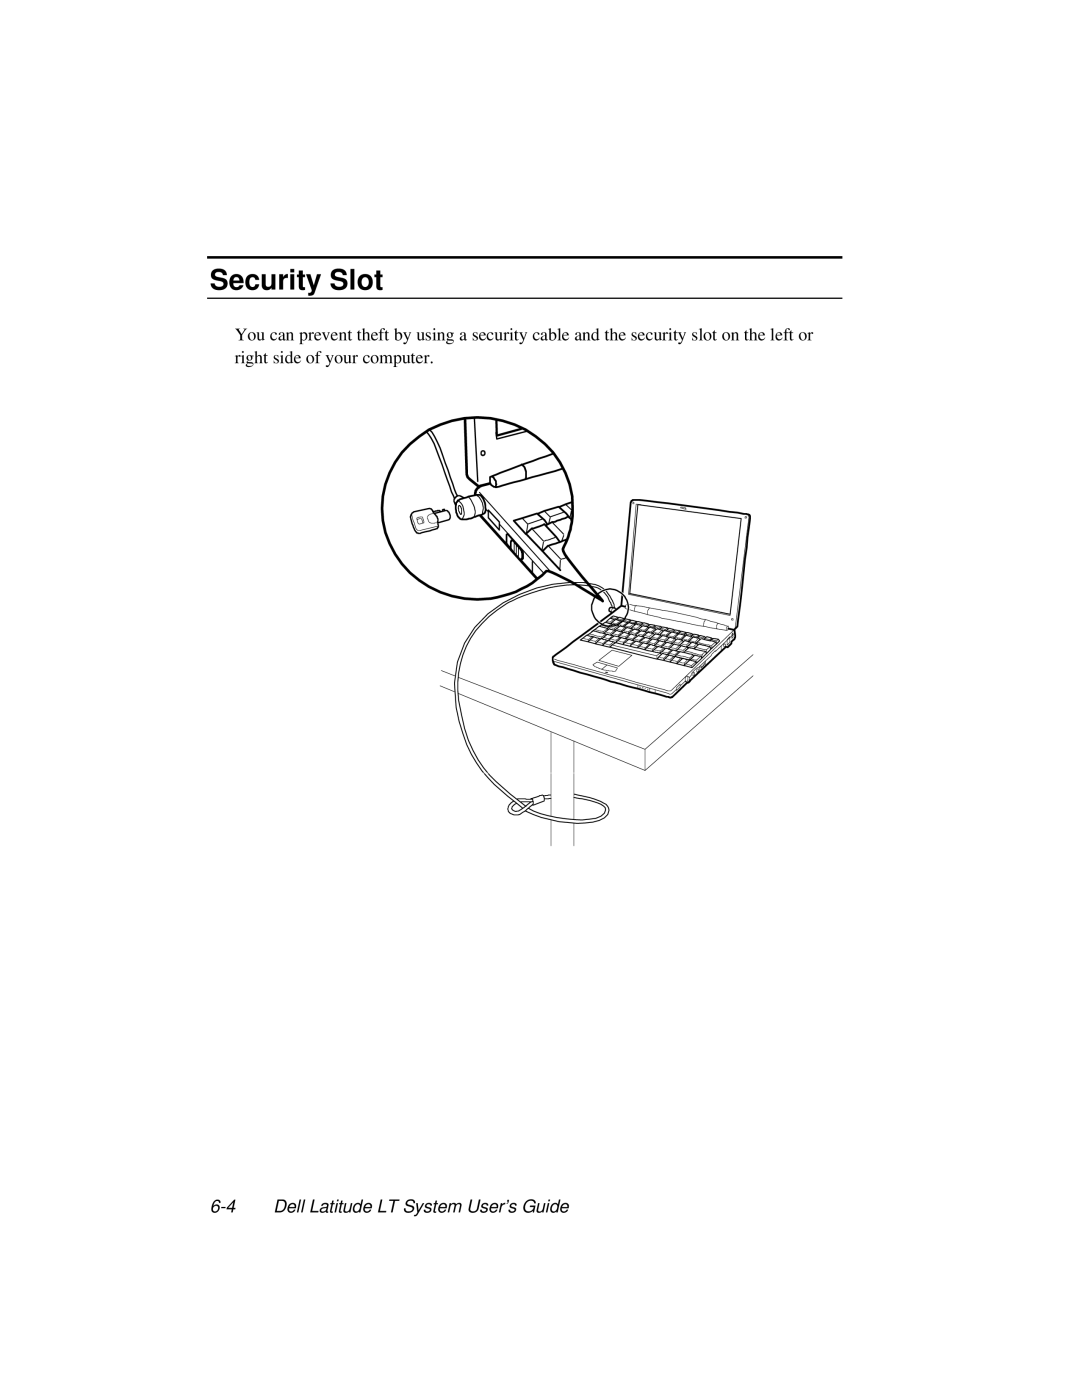 Dell LT System manual Security Slot 